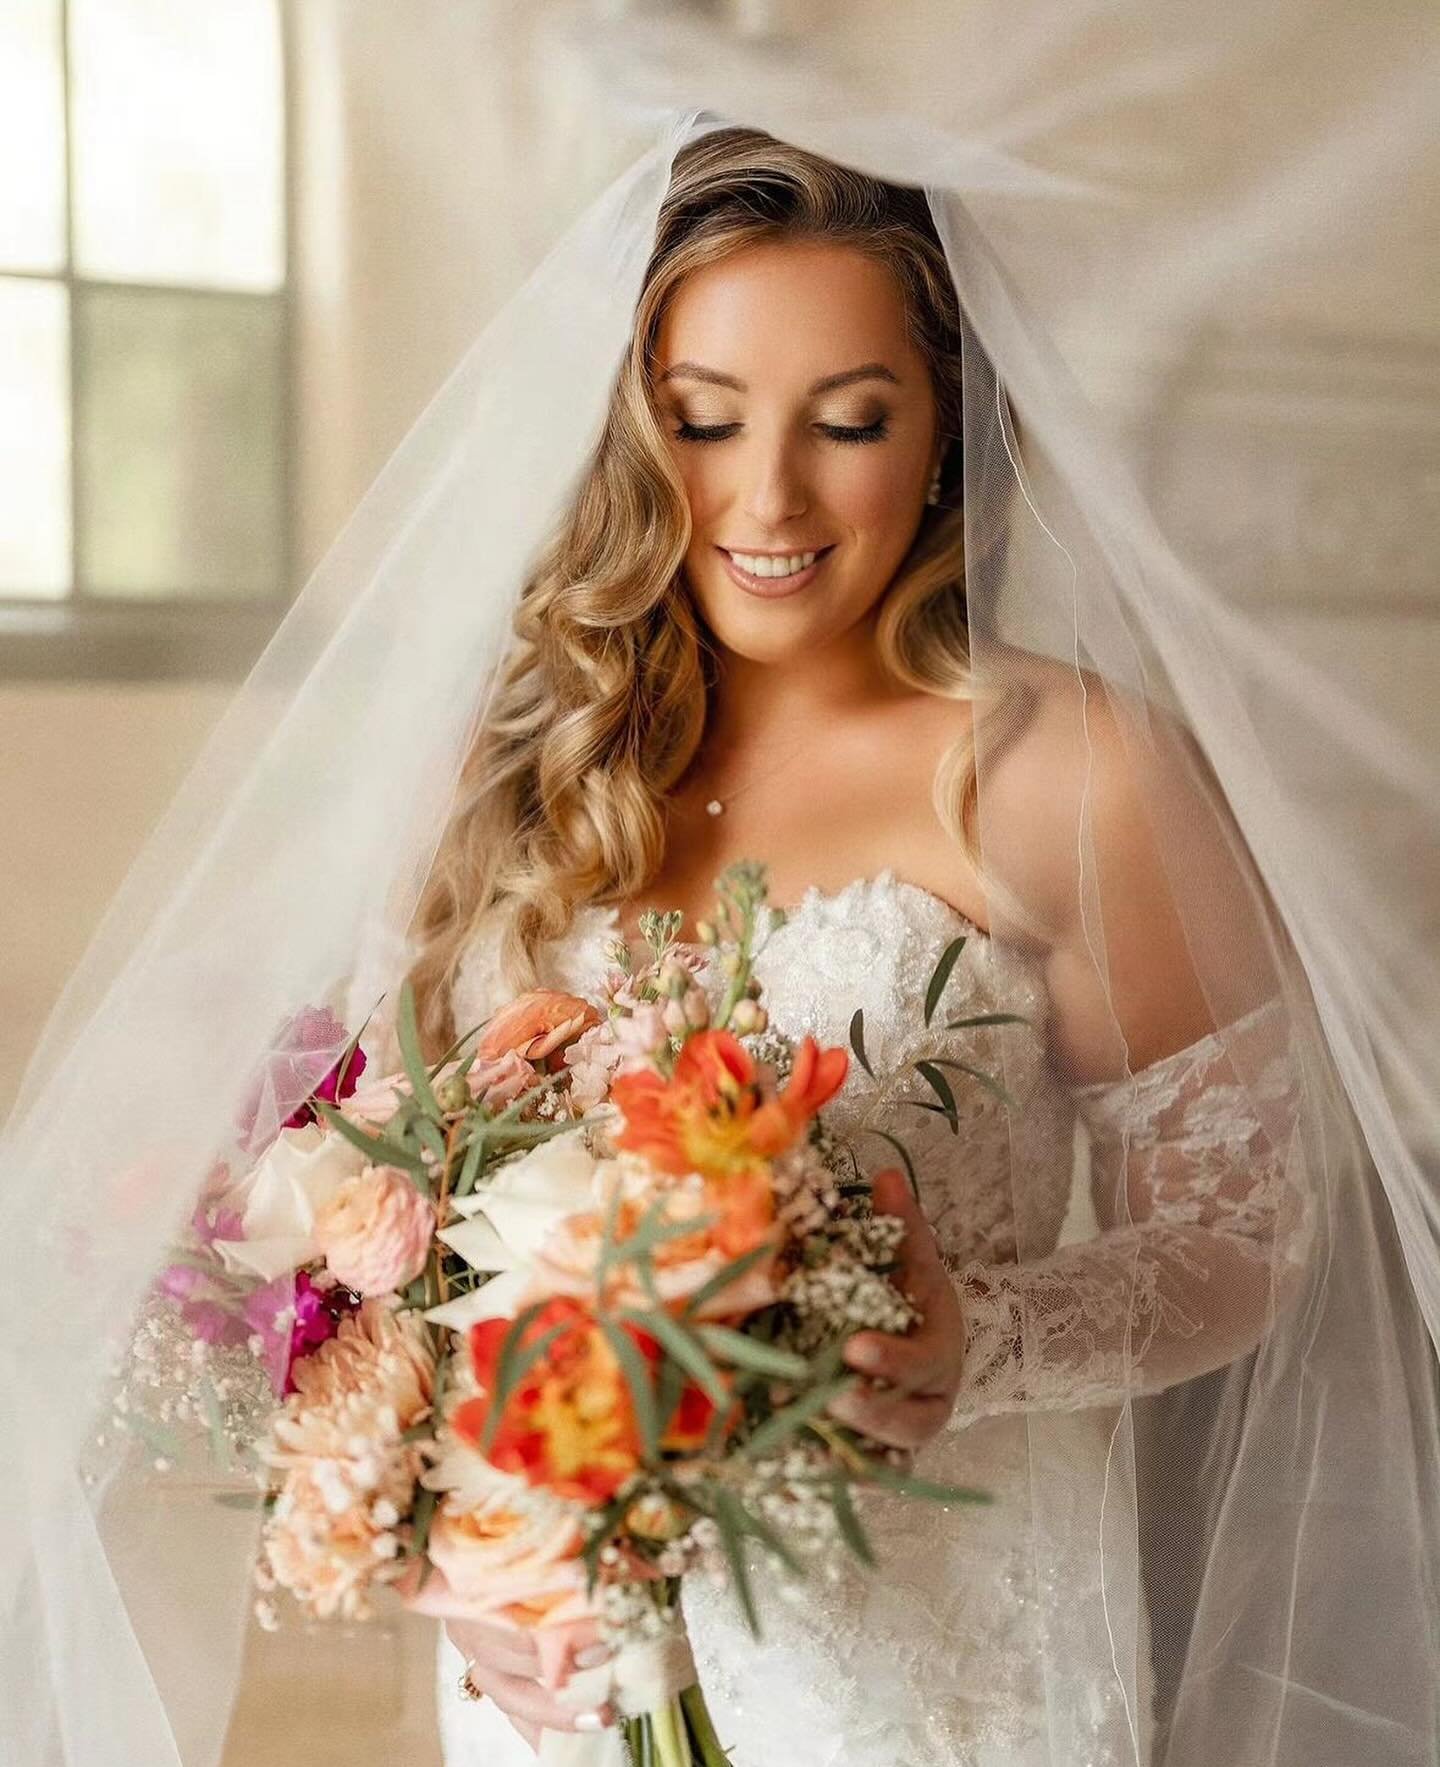 How breathtaking are these sneak peeks from @alisasuephotography!?! We are forever obsessed with this day, these two lovebirds, and these stunning florals from @armsofpersephonefloral! Can&rsquo;t wait to share more 😍🧡

Coordination: @mdpevents
Pho